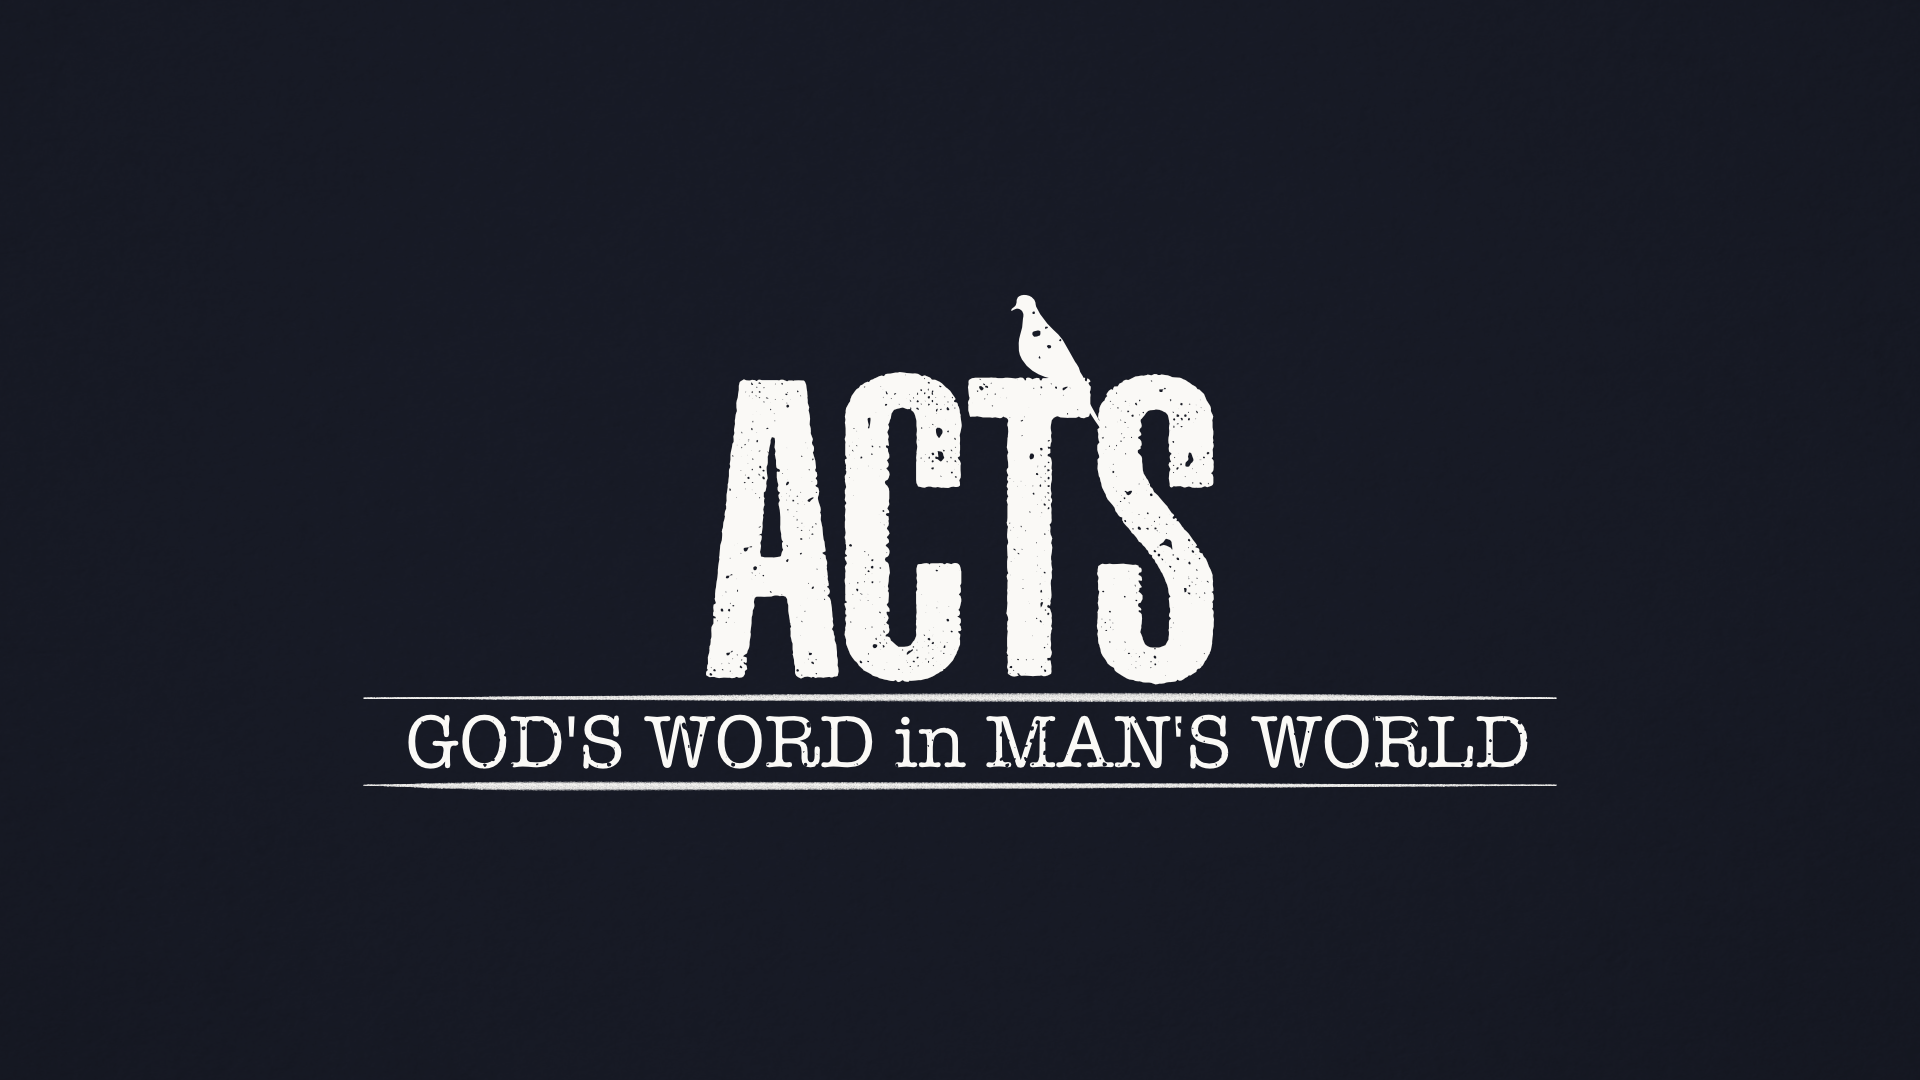 Acts 6:8-15 -- The Overpowering Word of Jesus Christ